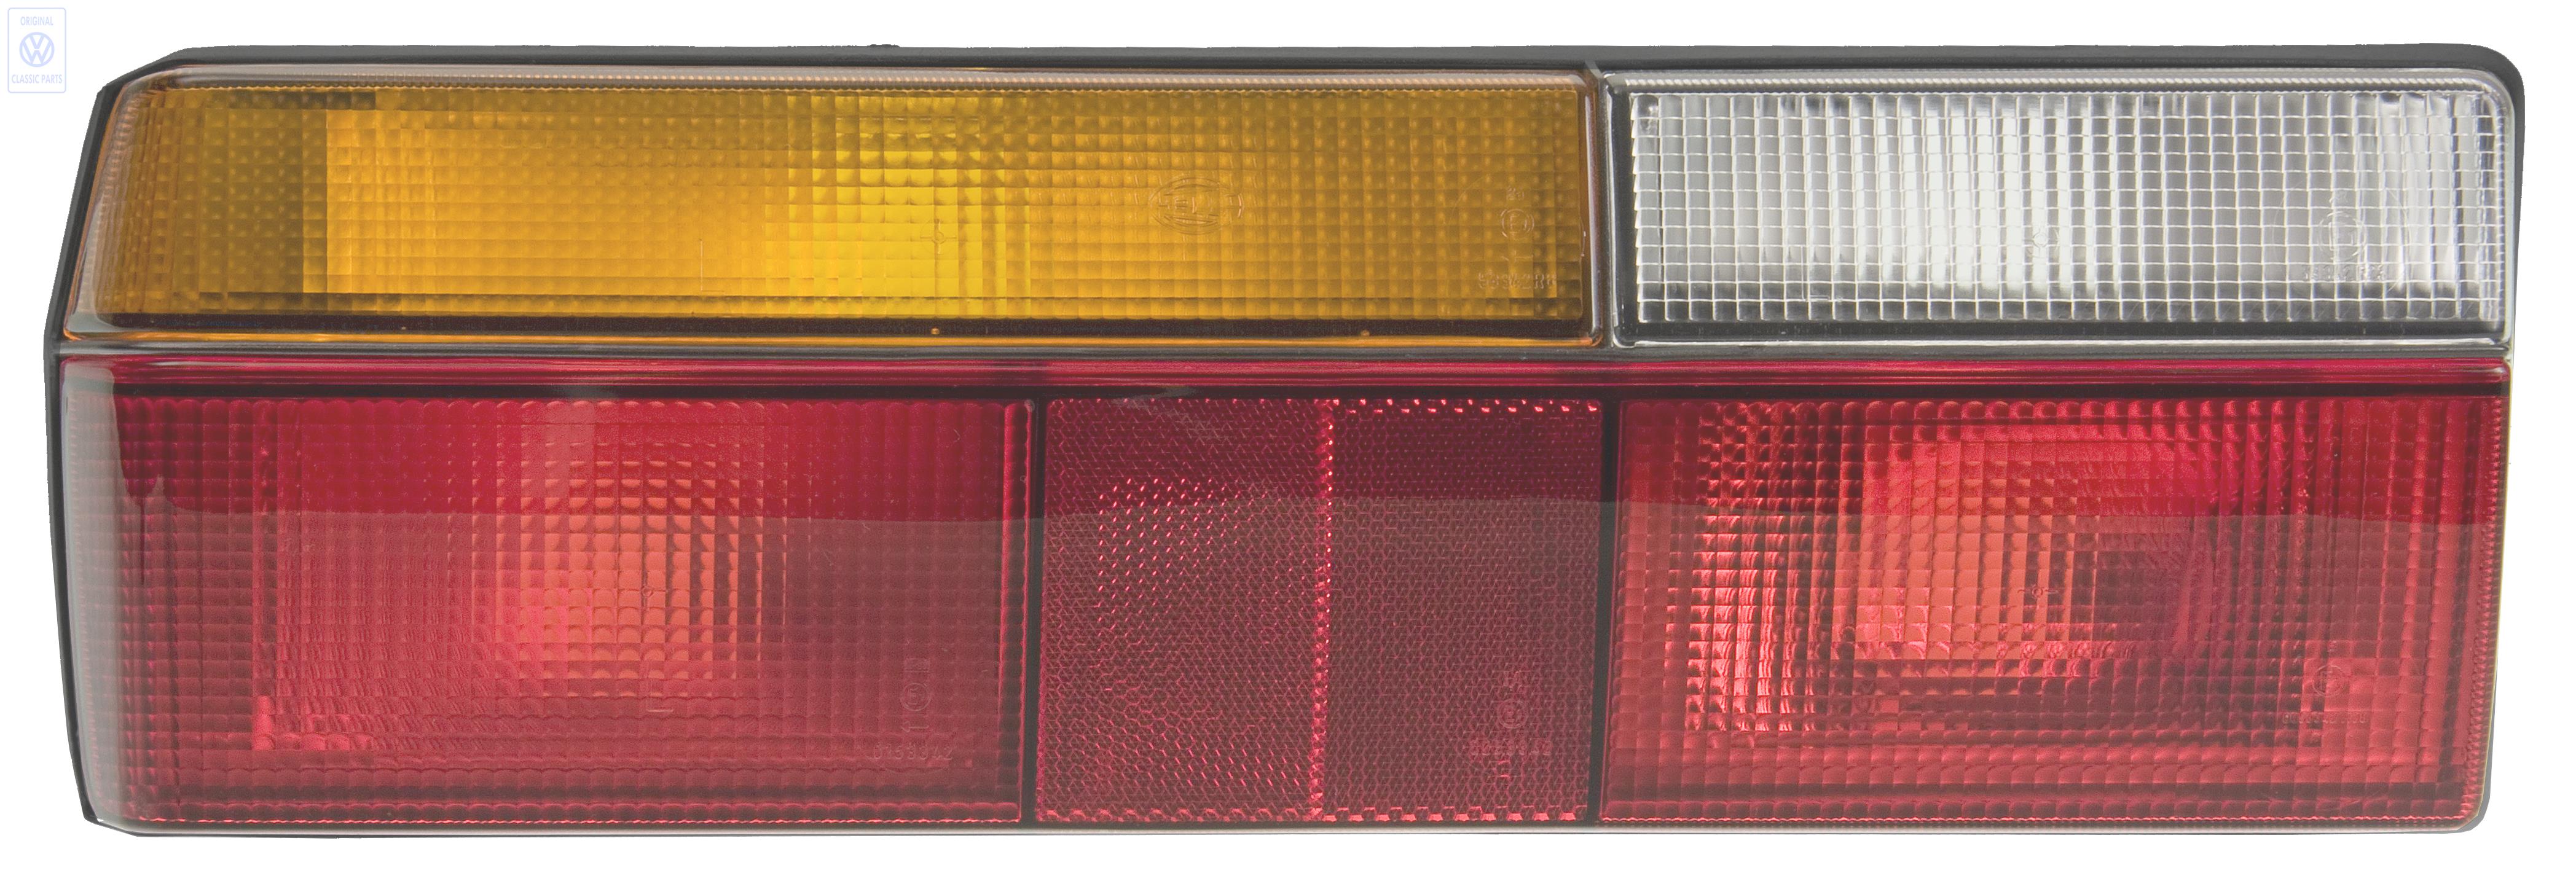 Tail light for VW Derby